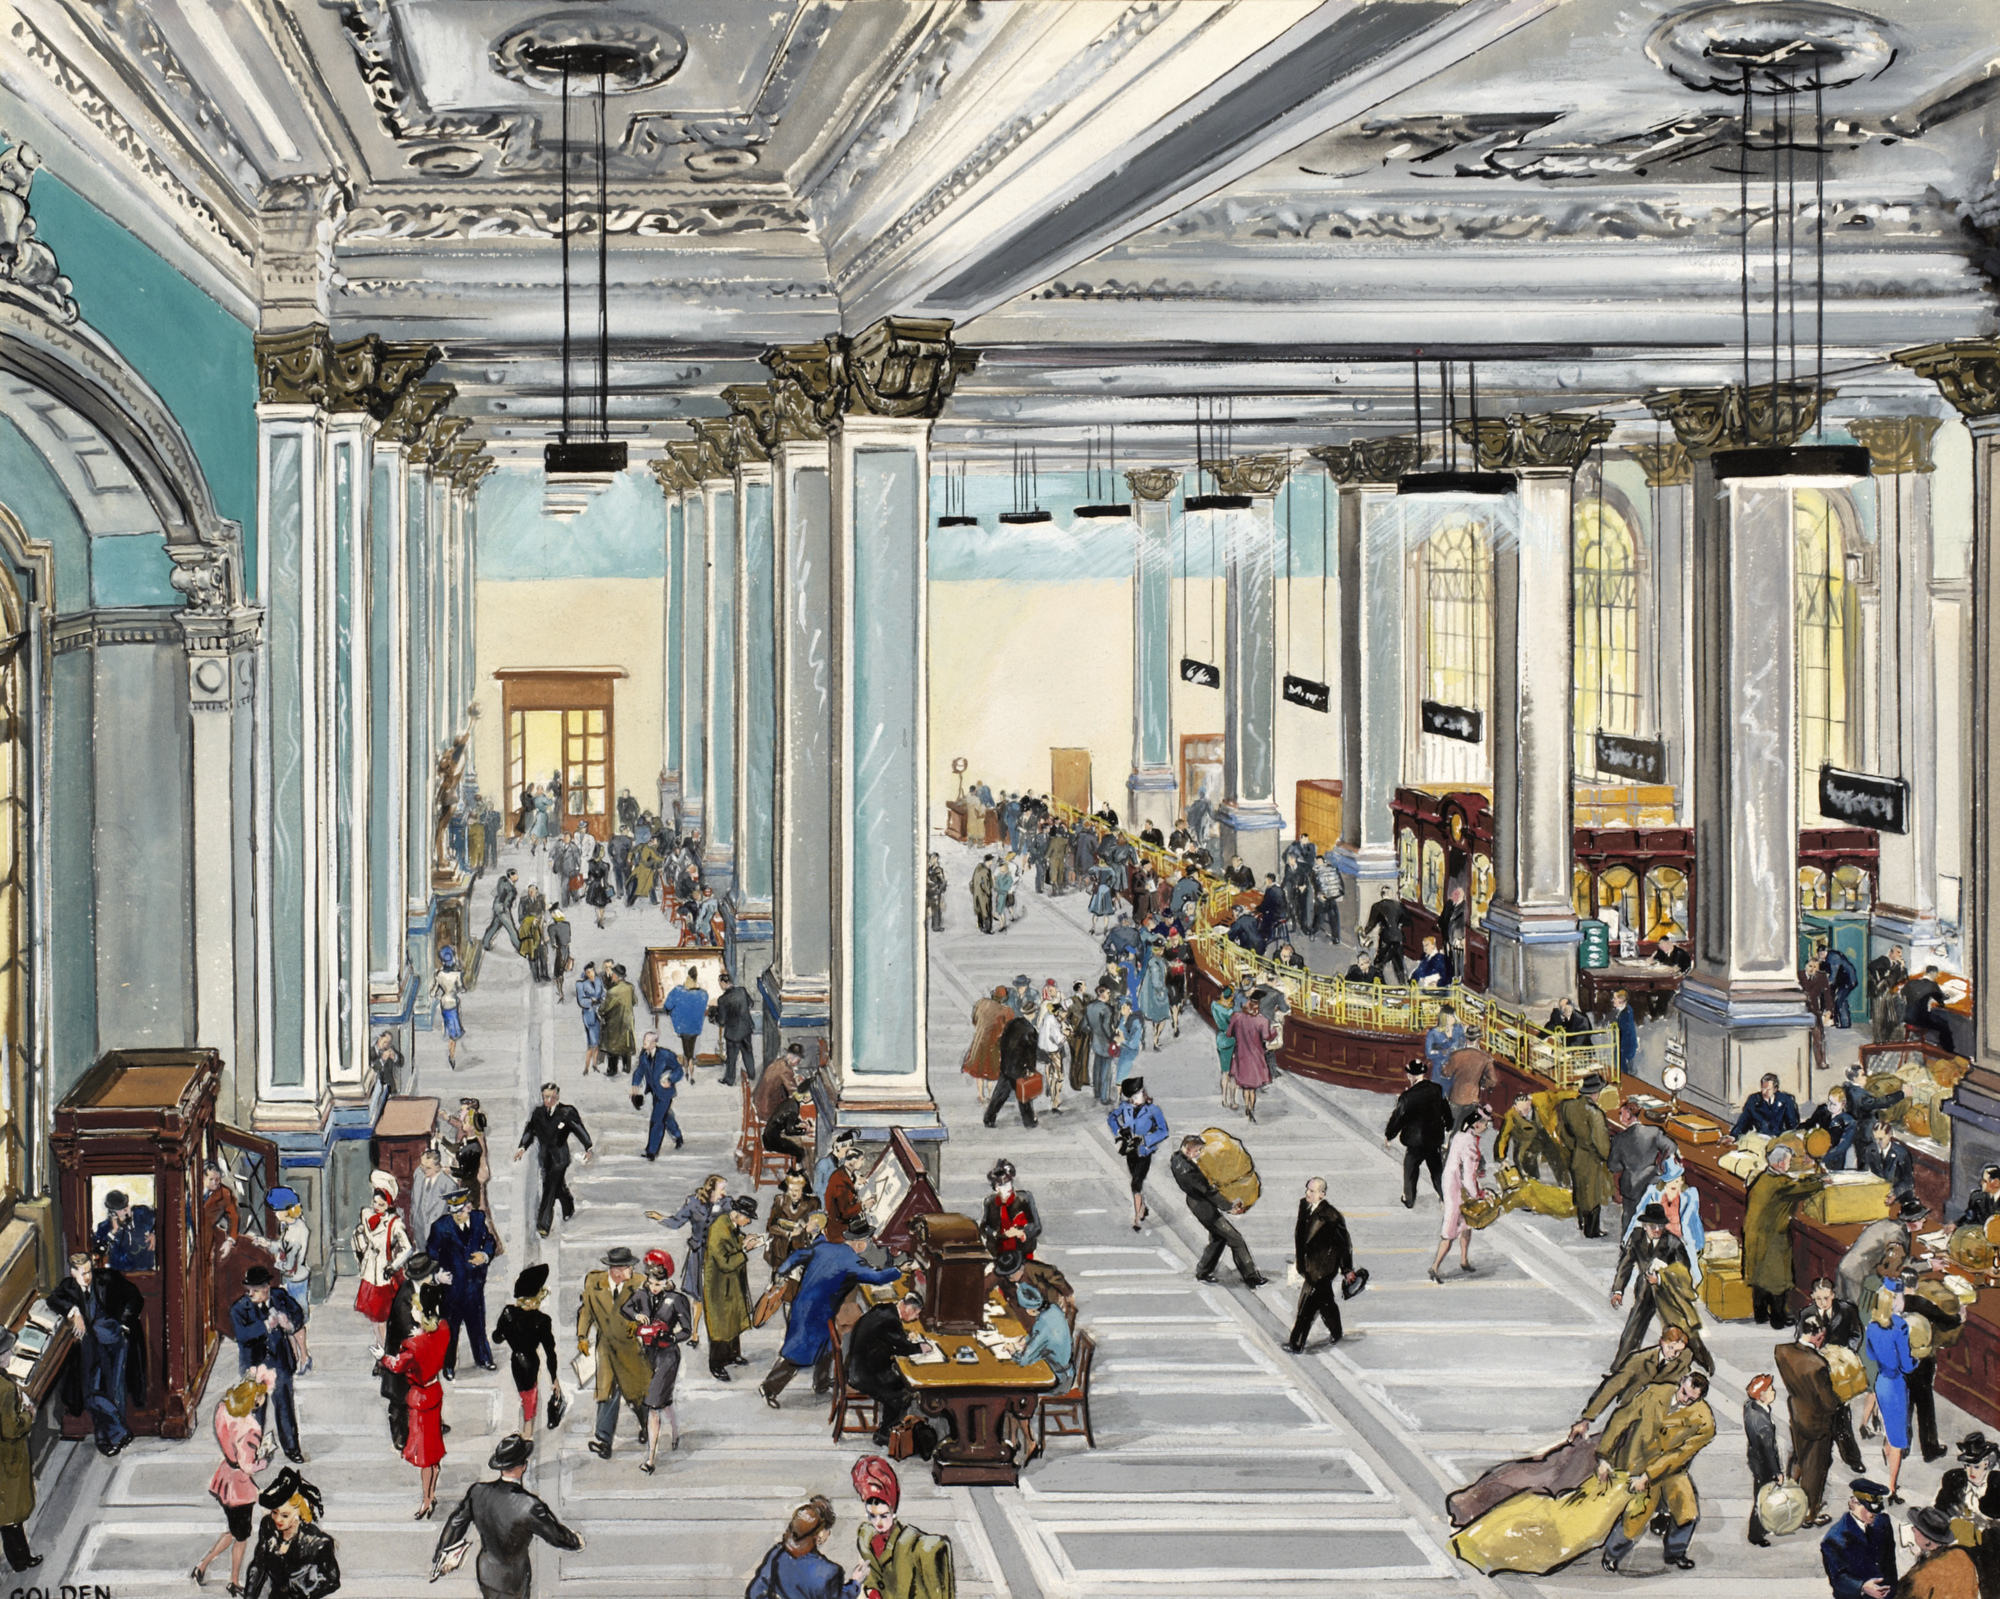 Changing Architecture of London's Post Office Quarter - The Postal Museum